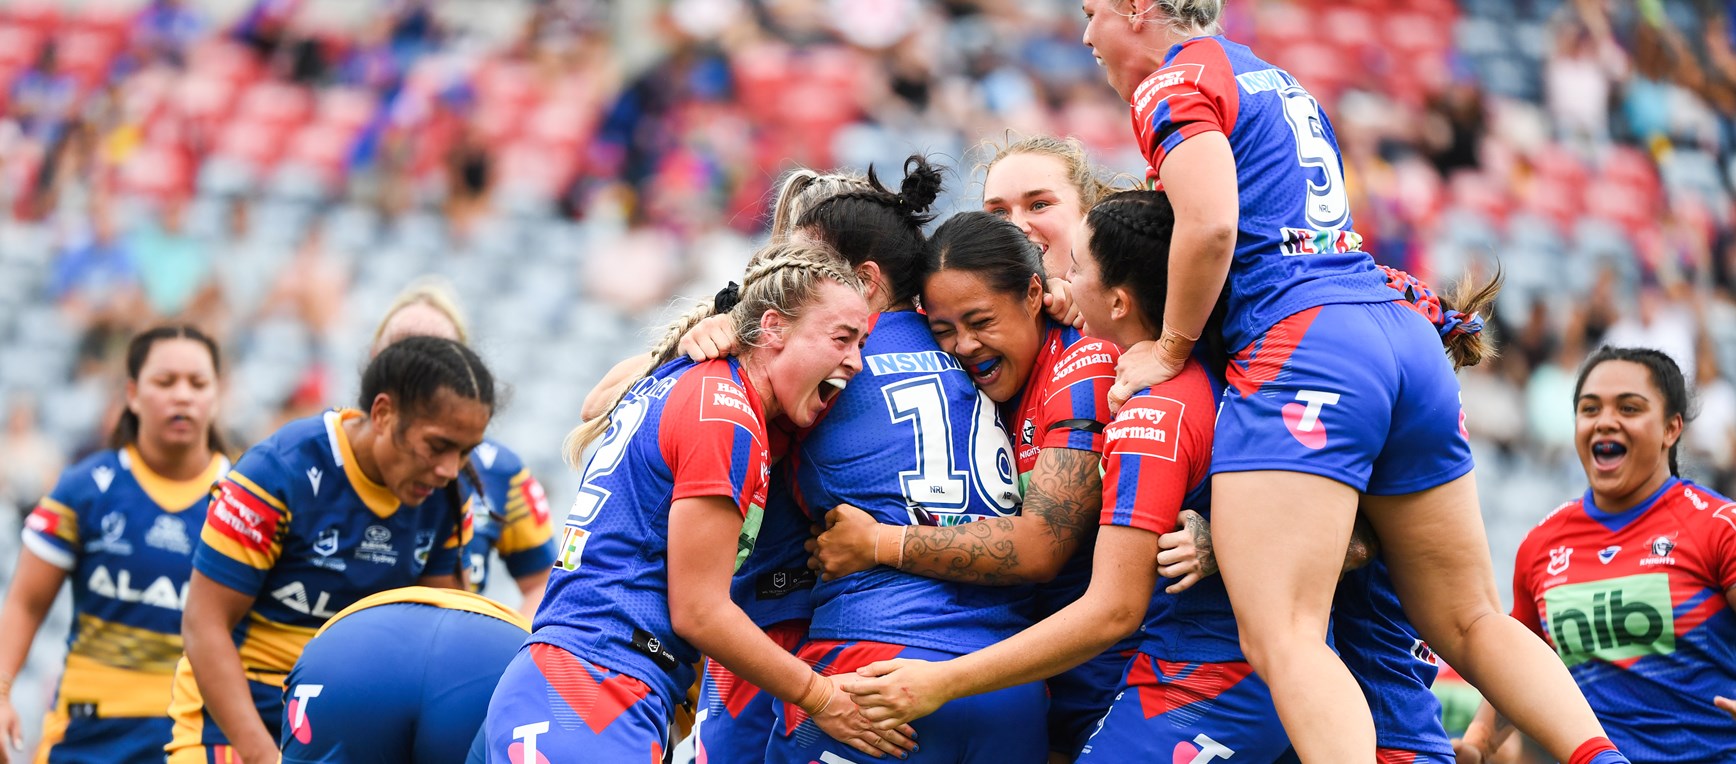 Gallery: Our first season in the NRLW